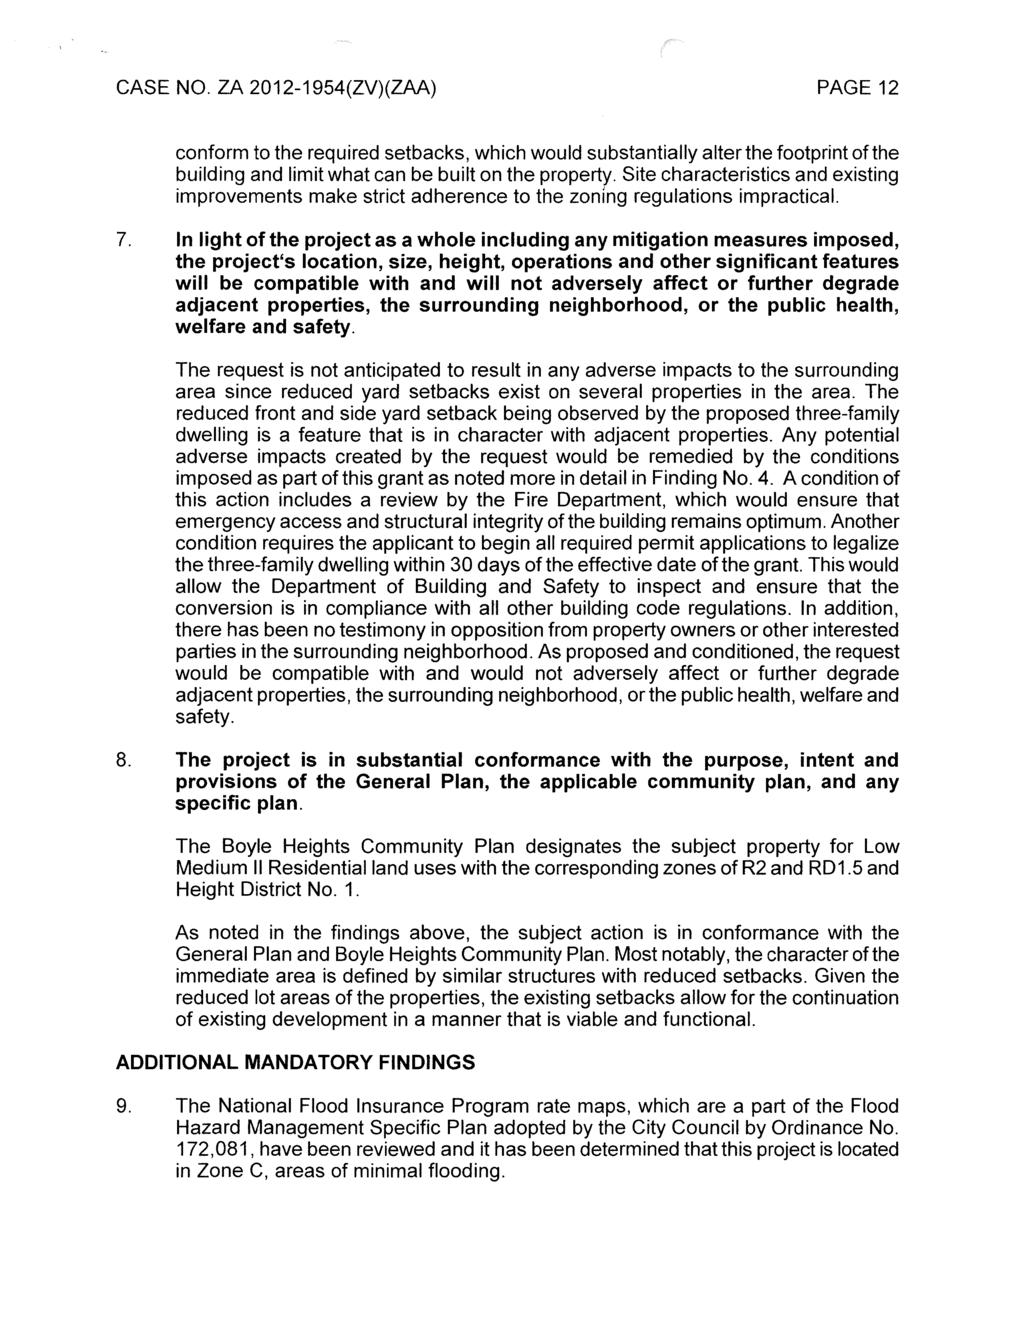 PAGE12 conform to the required setbacks, which would substantially alter the footprint of the building and limit what can be built on the property.